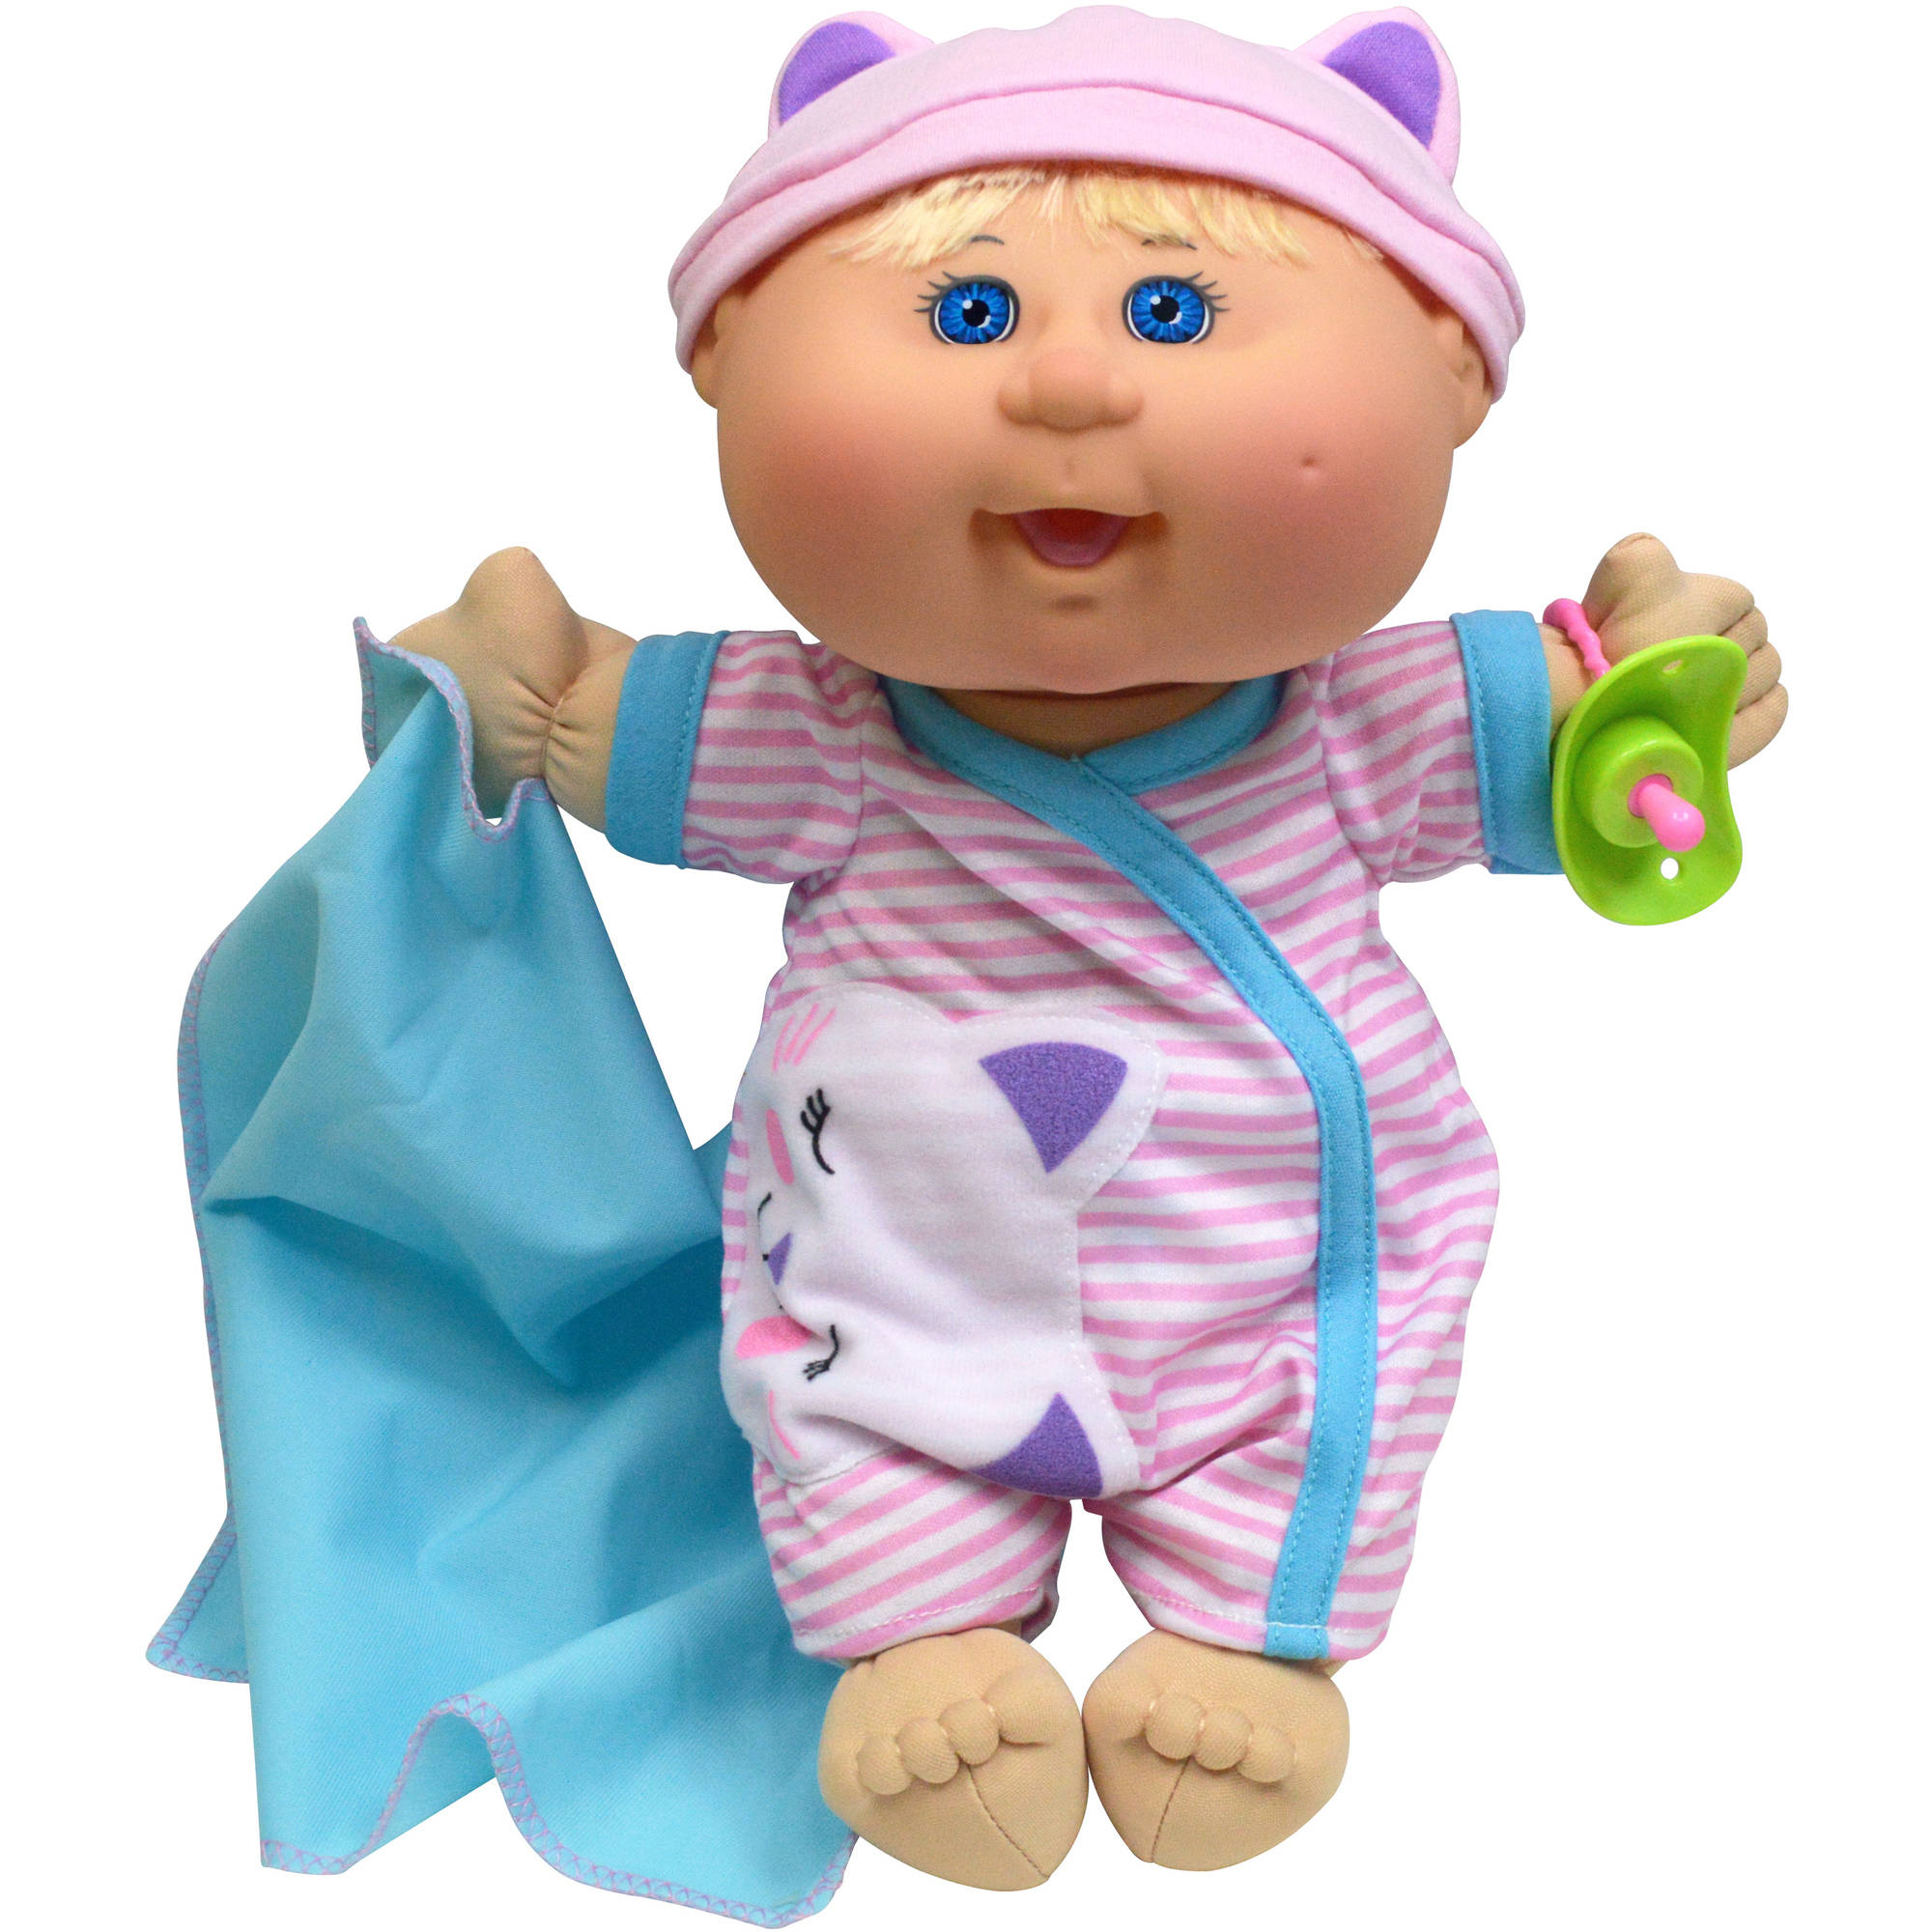 Cabbage Patch Kids Naptime Babies Doll, Bald/Blue Eye Girl - image 2 of 3